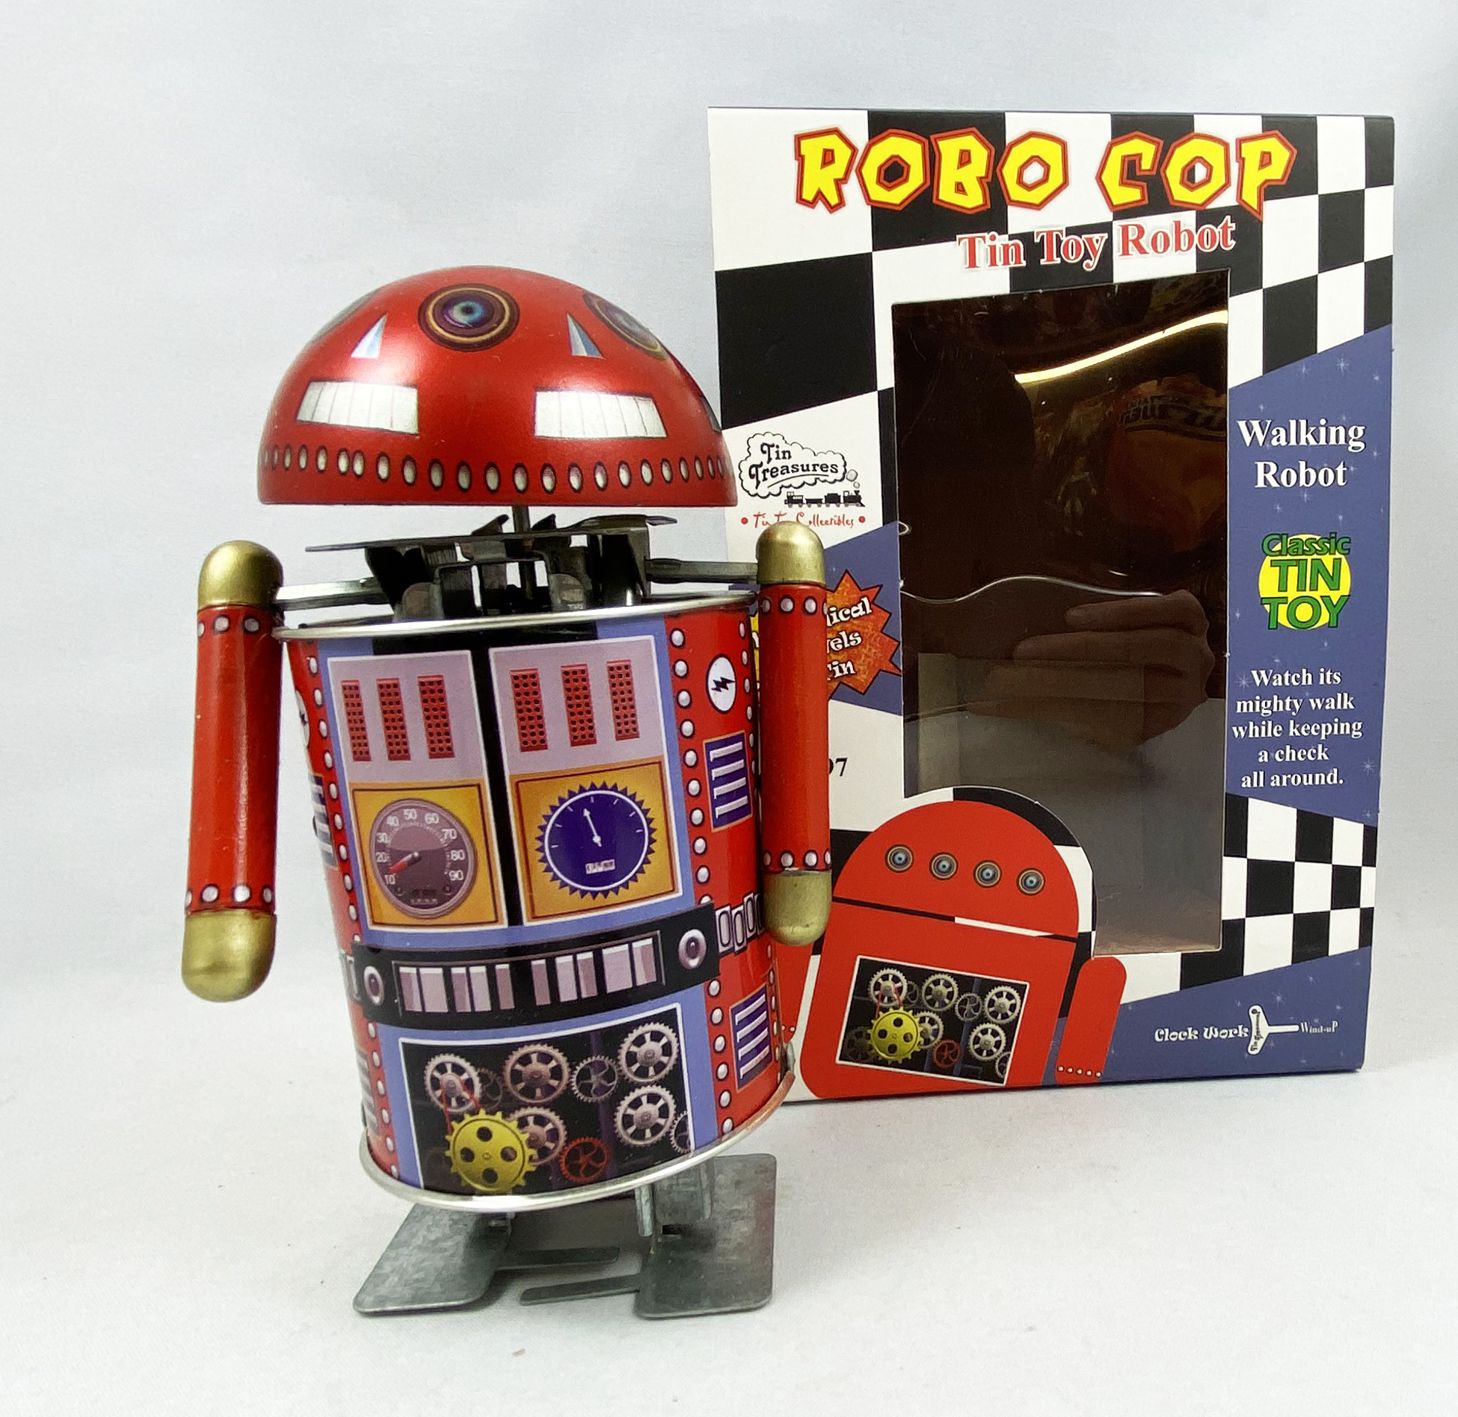 Robo Cop Tin Toy Windup Google Droid by Welby Toys 